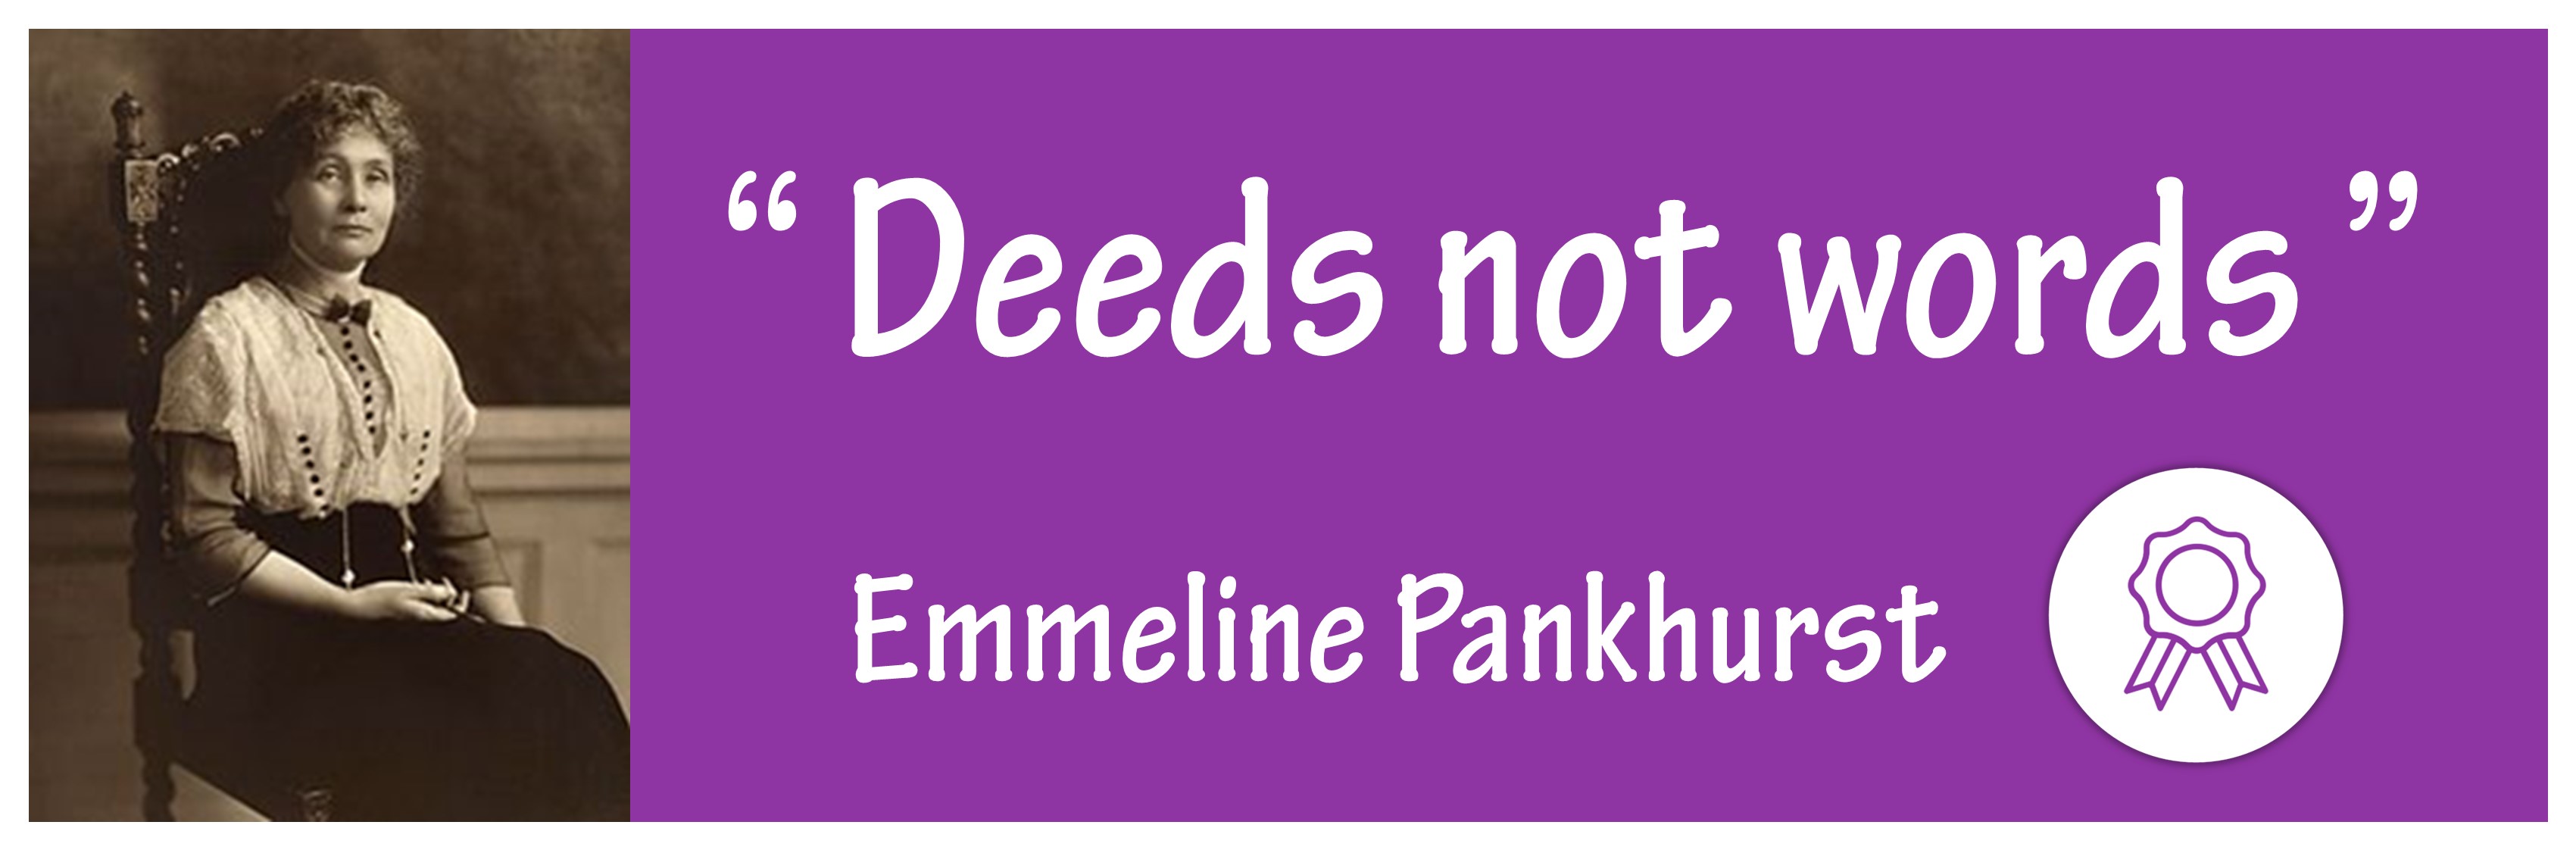 Pankhurst - House Heroes Quote Banners July 2020